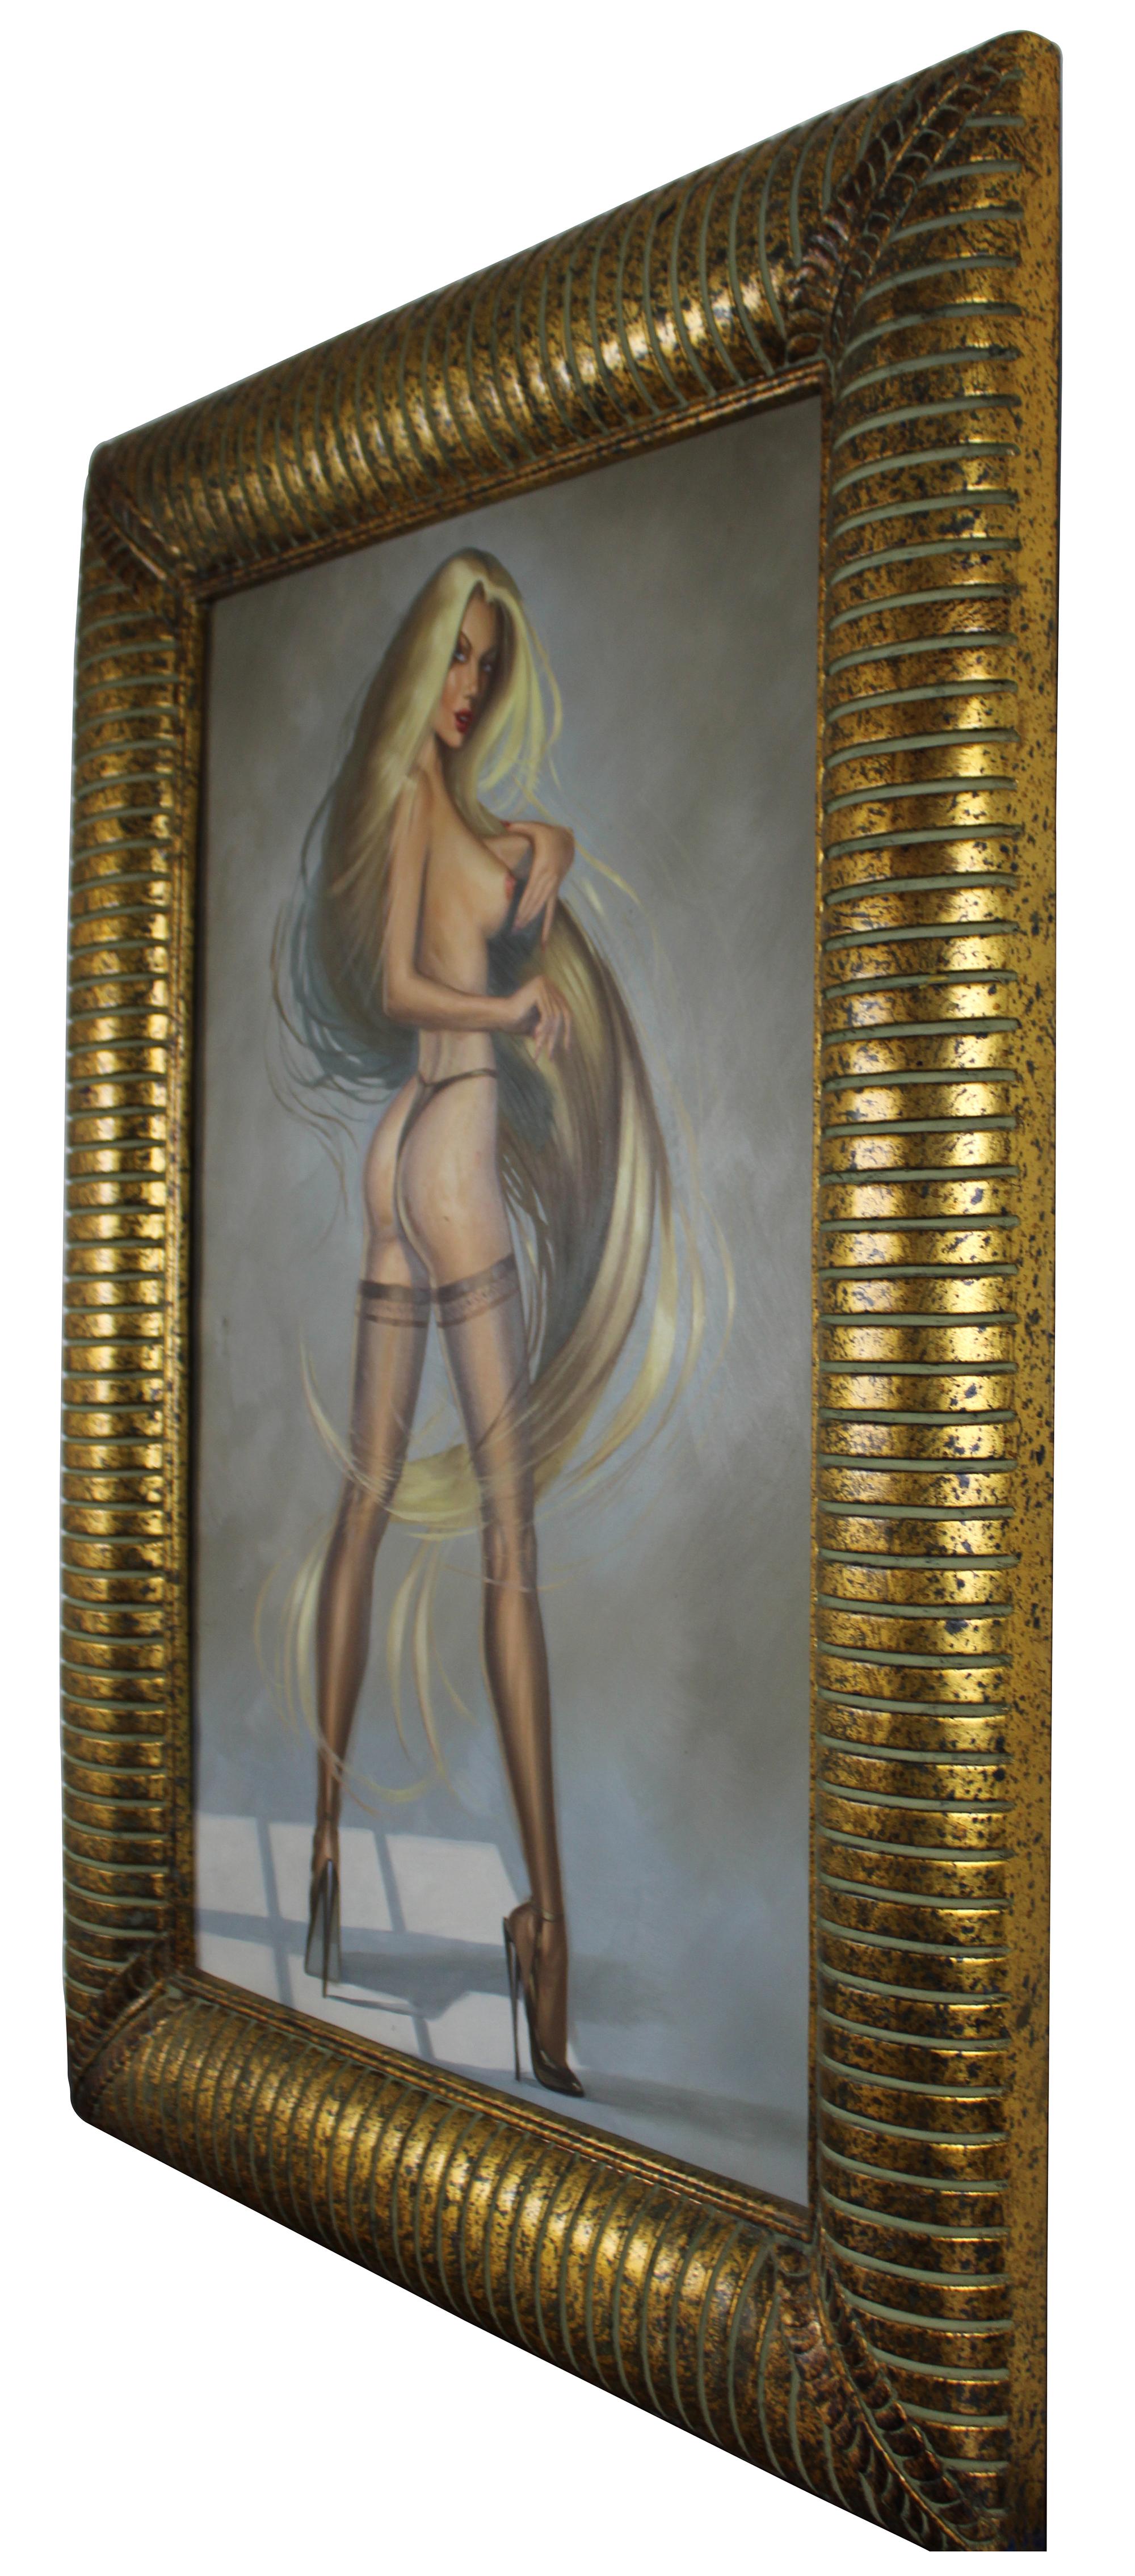 20th century erotic woman oil painting. Features a blonde woman with long flowing hair, dressed in lingerie and high heels. Framed in gold. Unsigned.

Measures: Sans frame 23.5